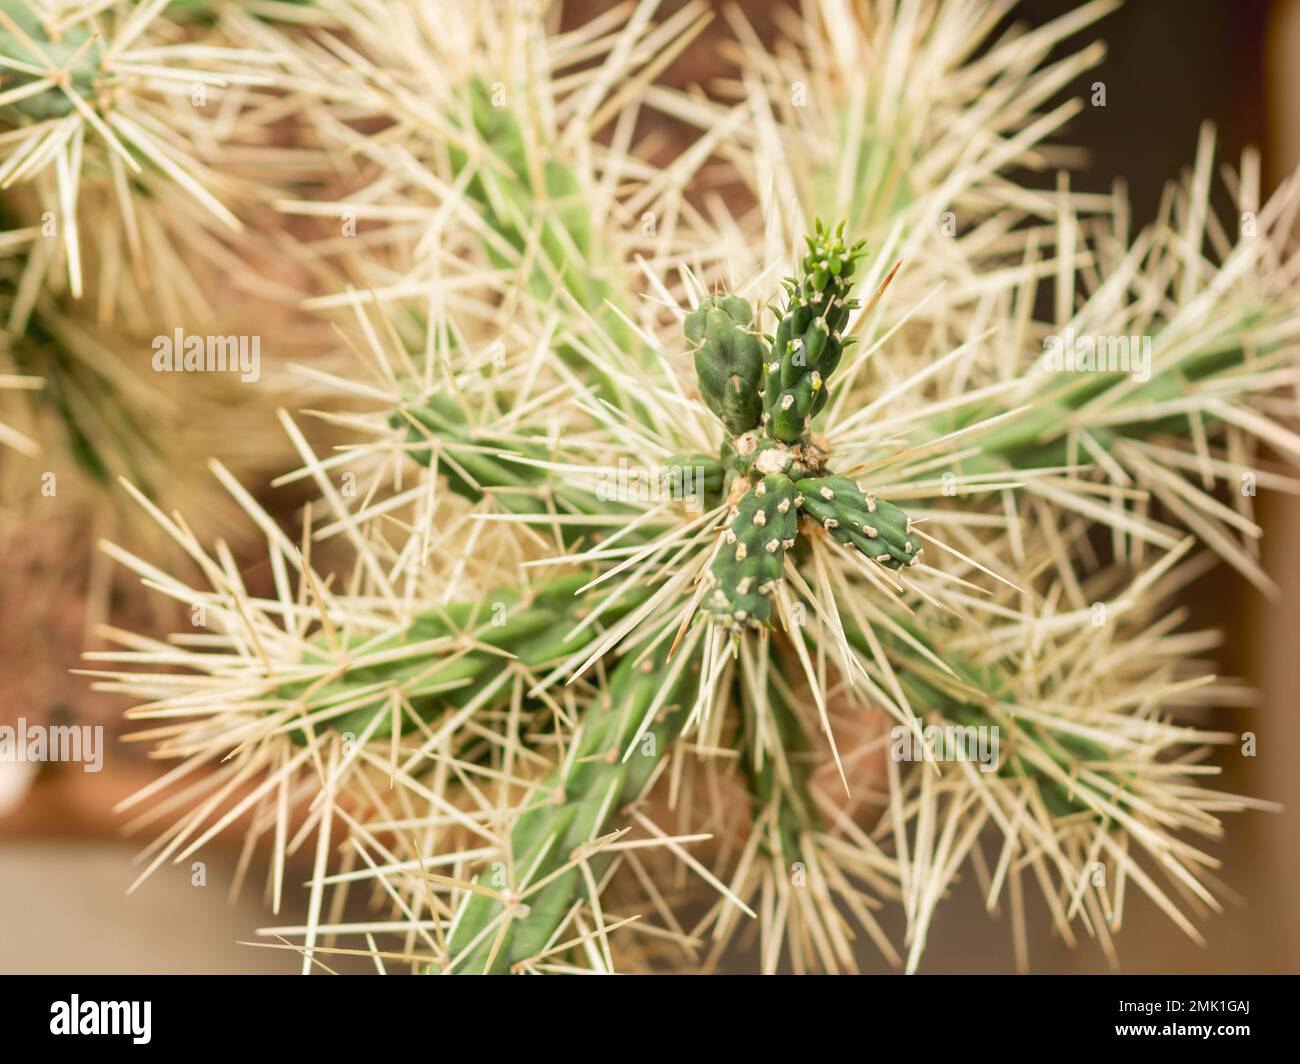 Prickly Cylindropuntia tunicata, commonly known as sheathed cholla. Cactus with long thorns. Stock Photo